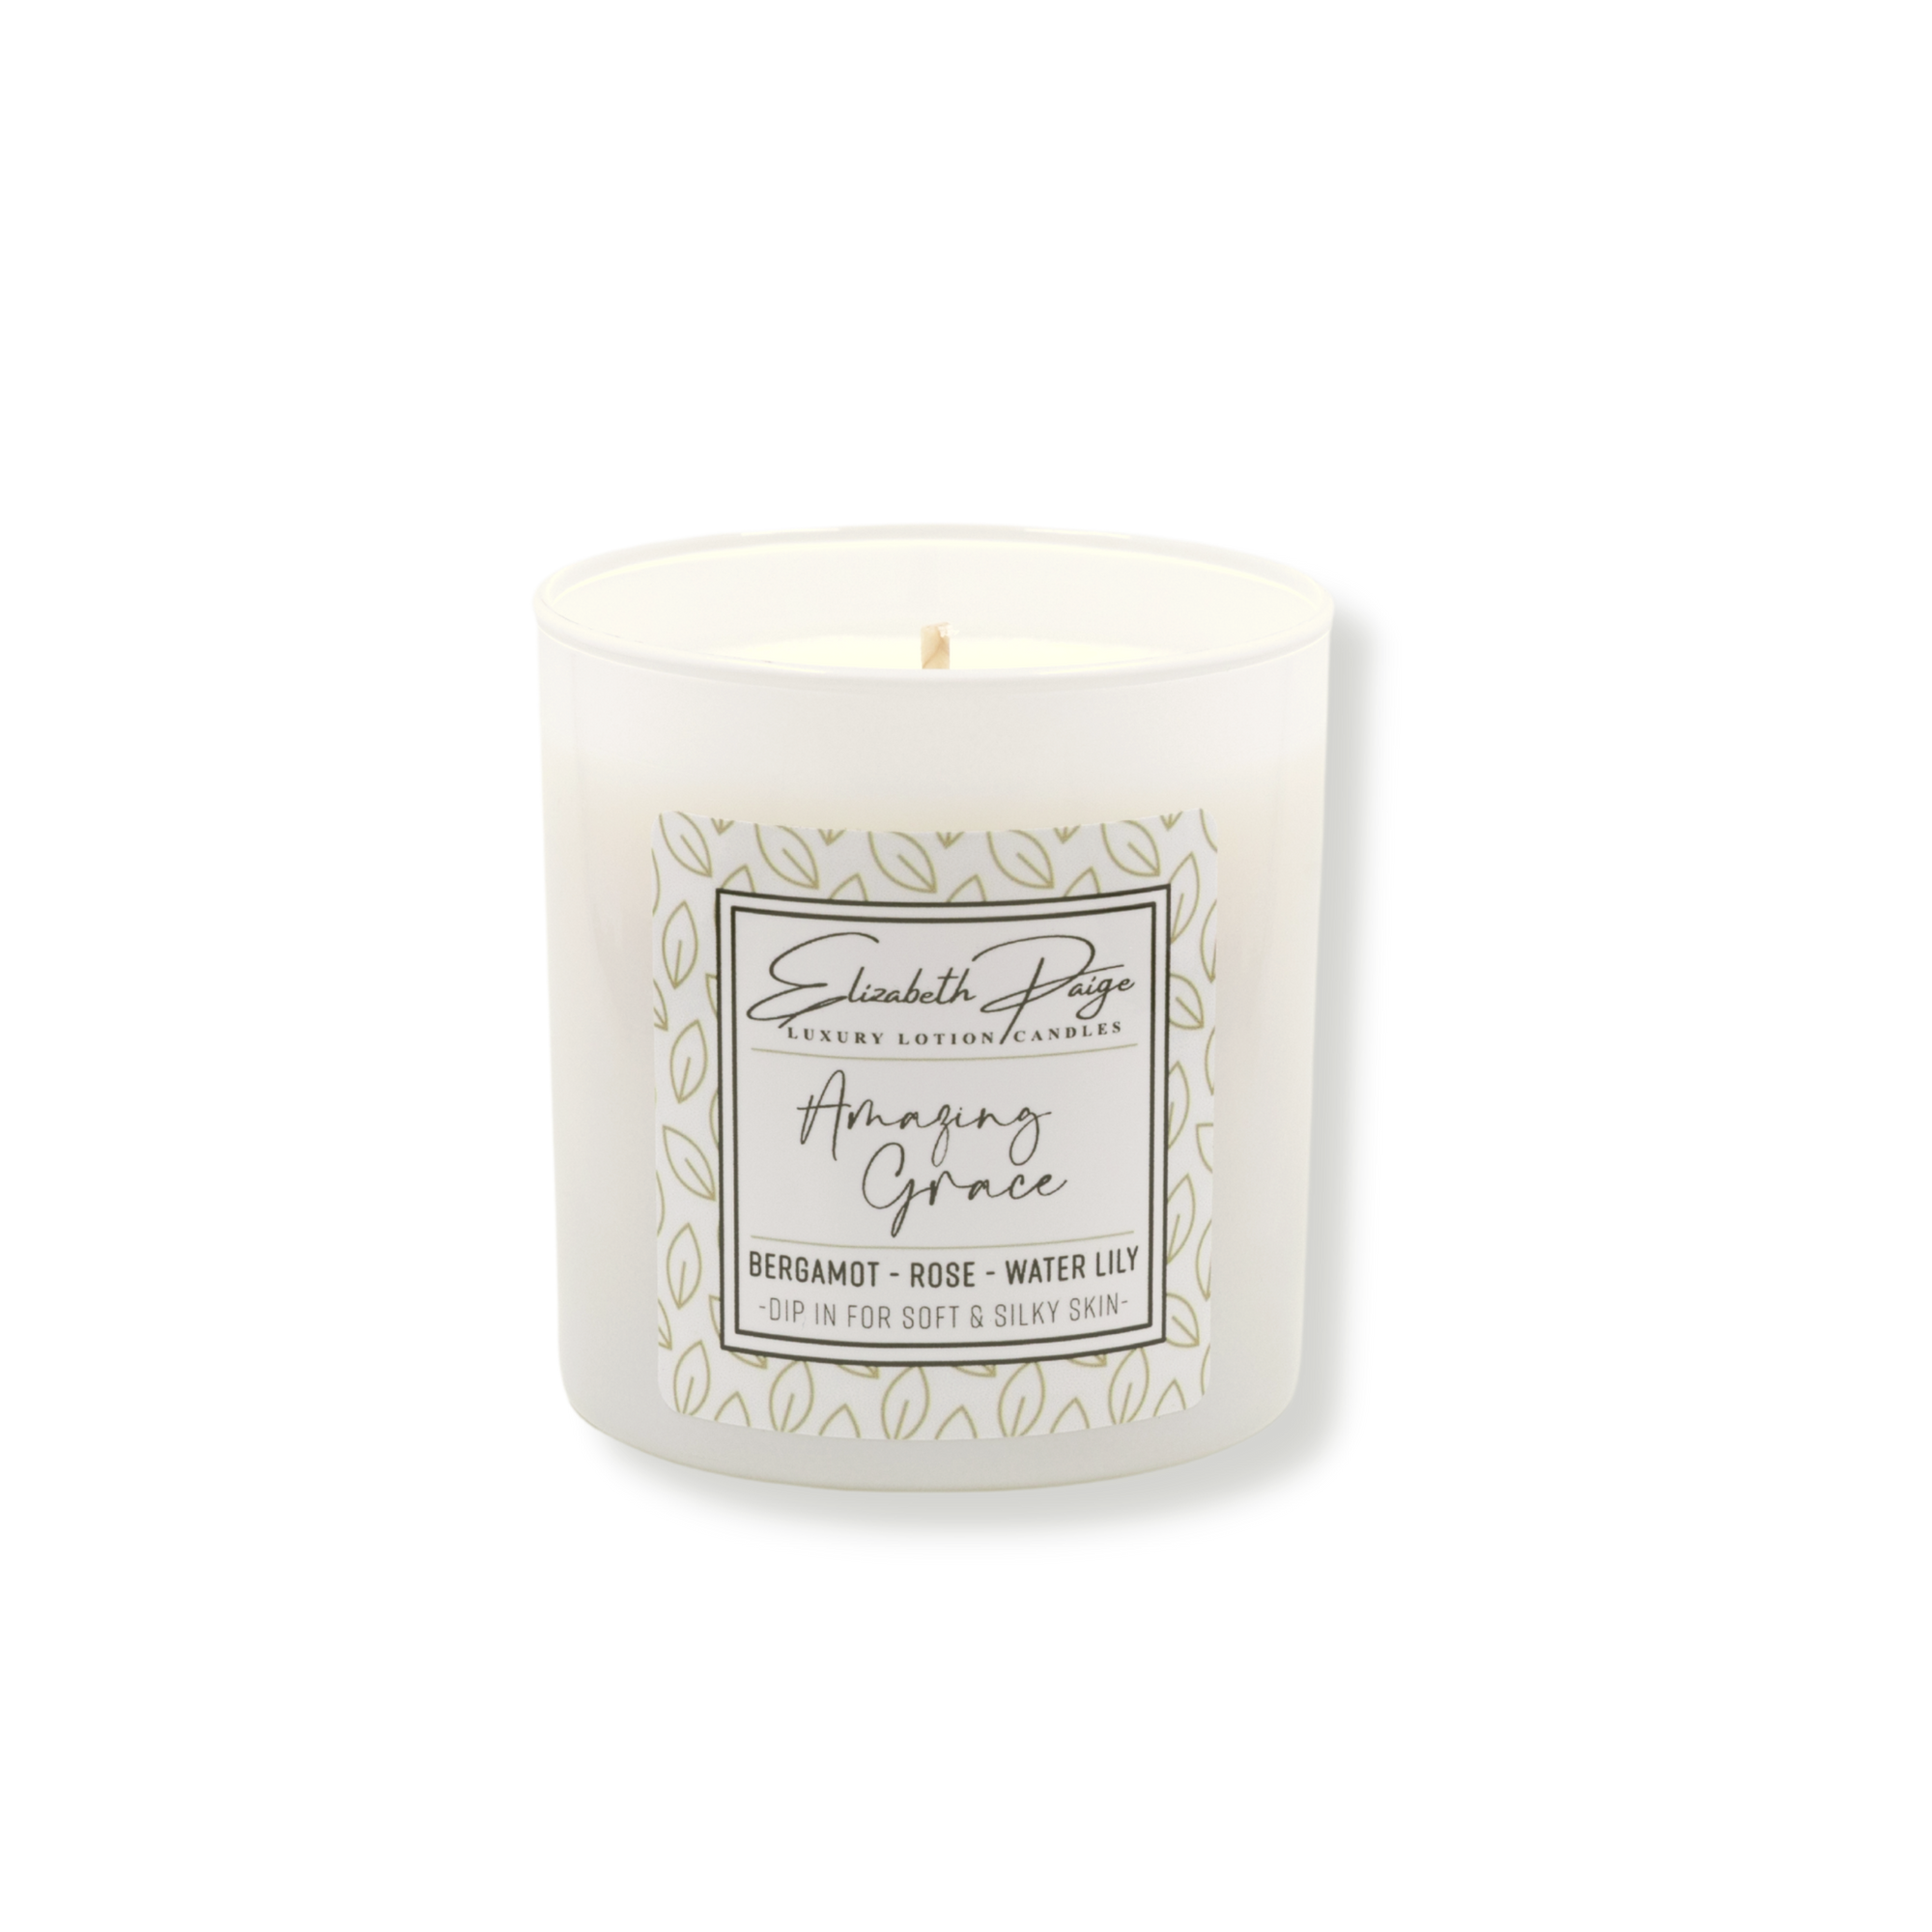 *9oz Soy Lotion Candle*